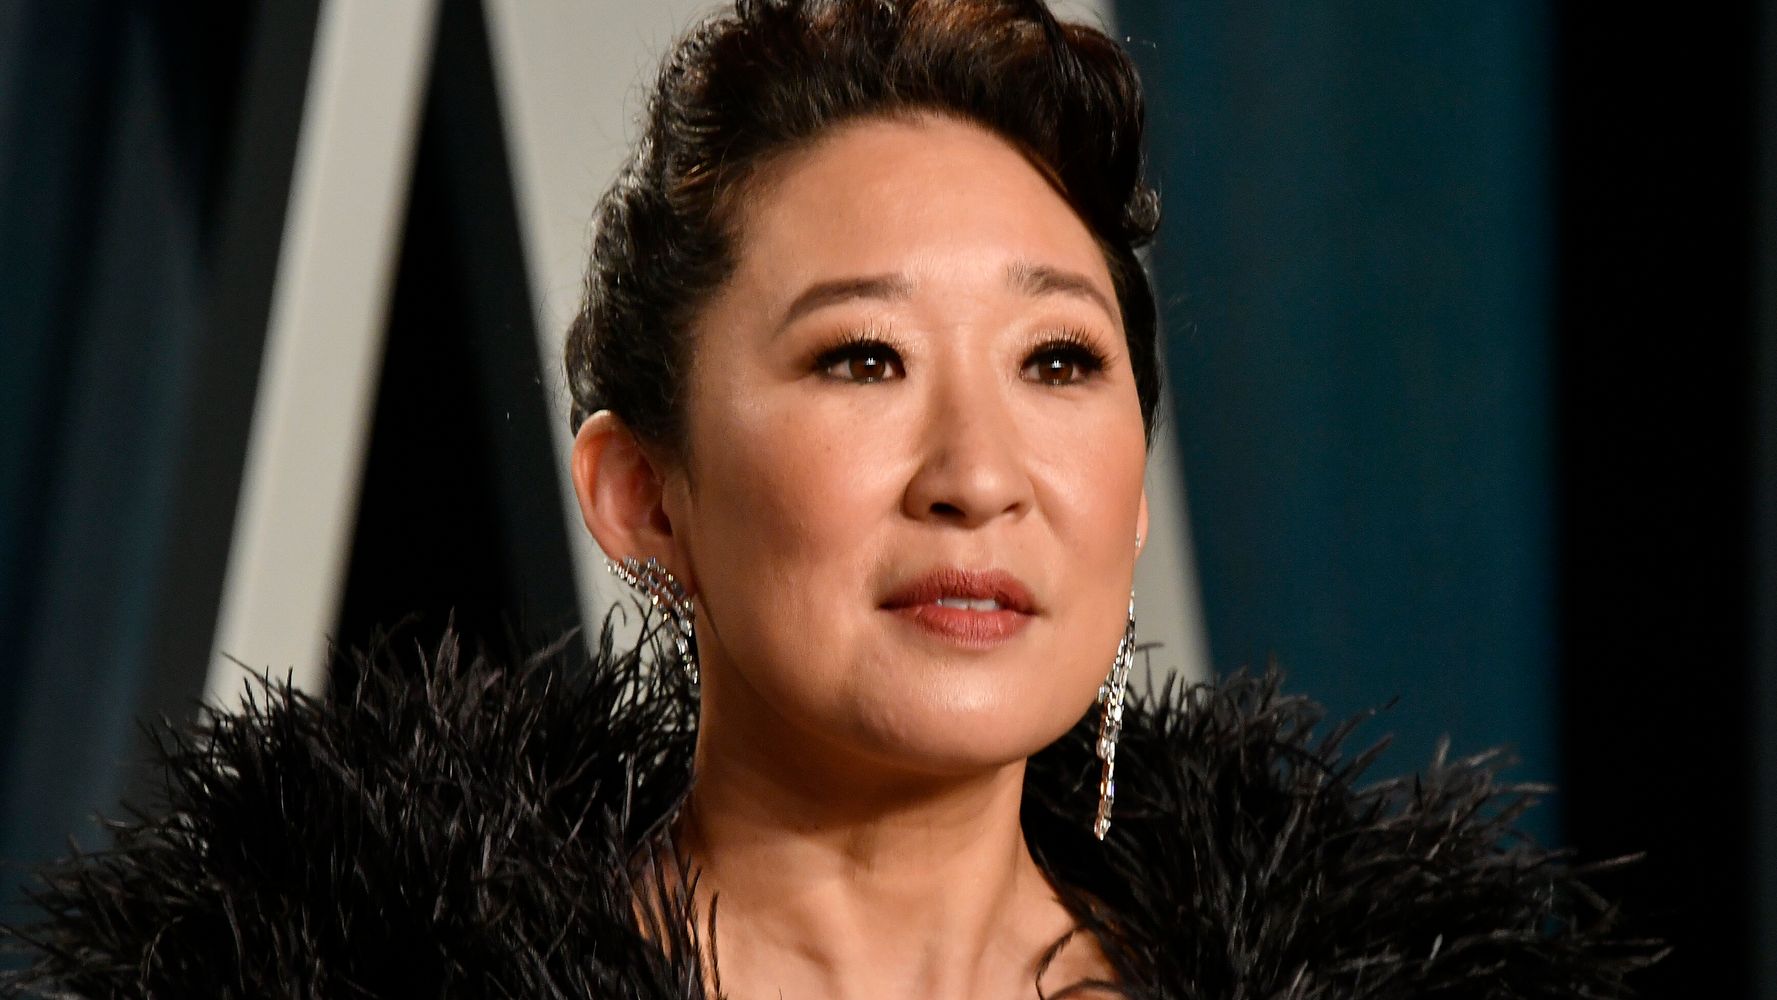 Sandra Oh calls for stopping anti-Asian hatred in strong speech: “I’m proud to be Asian”